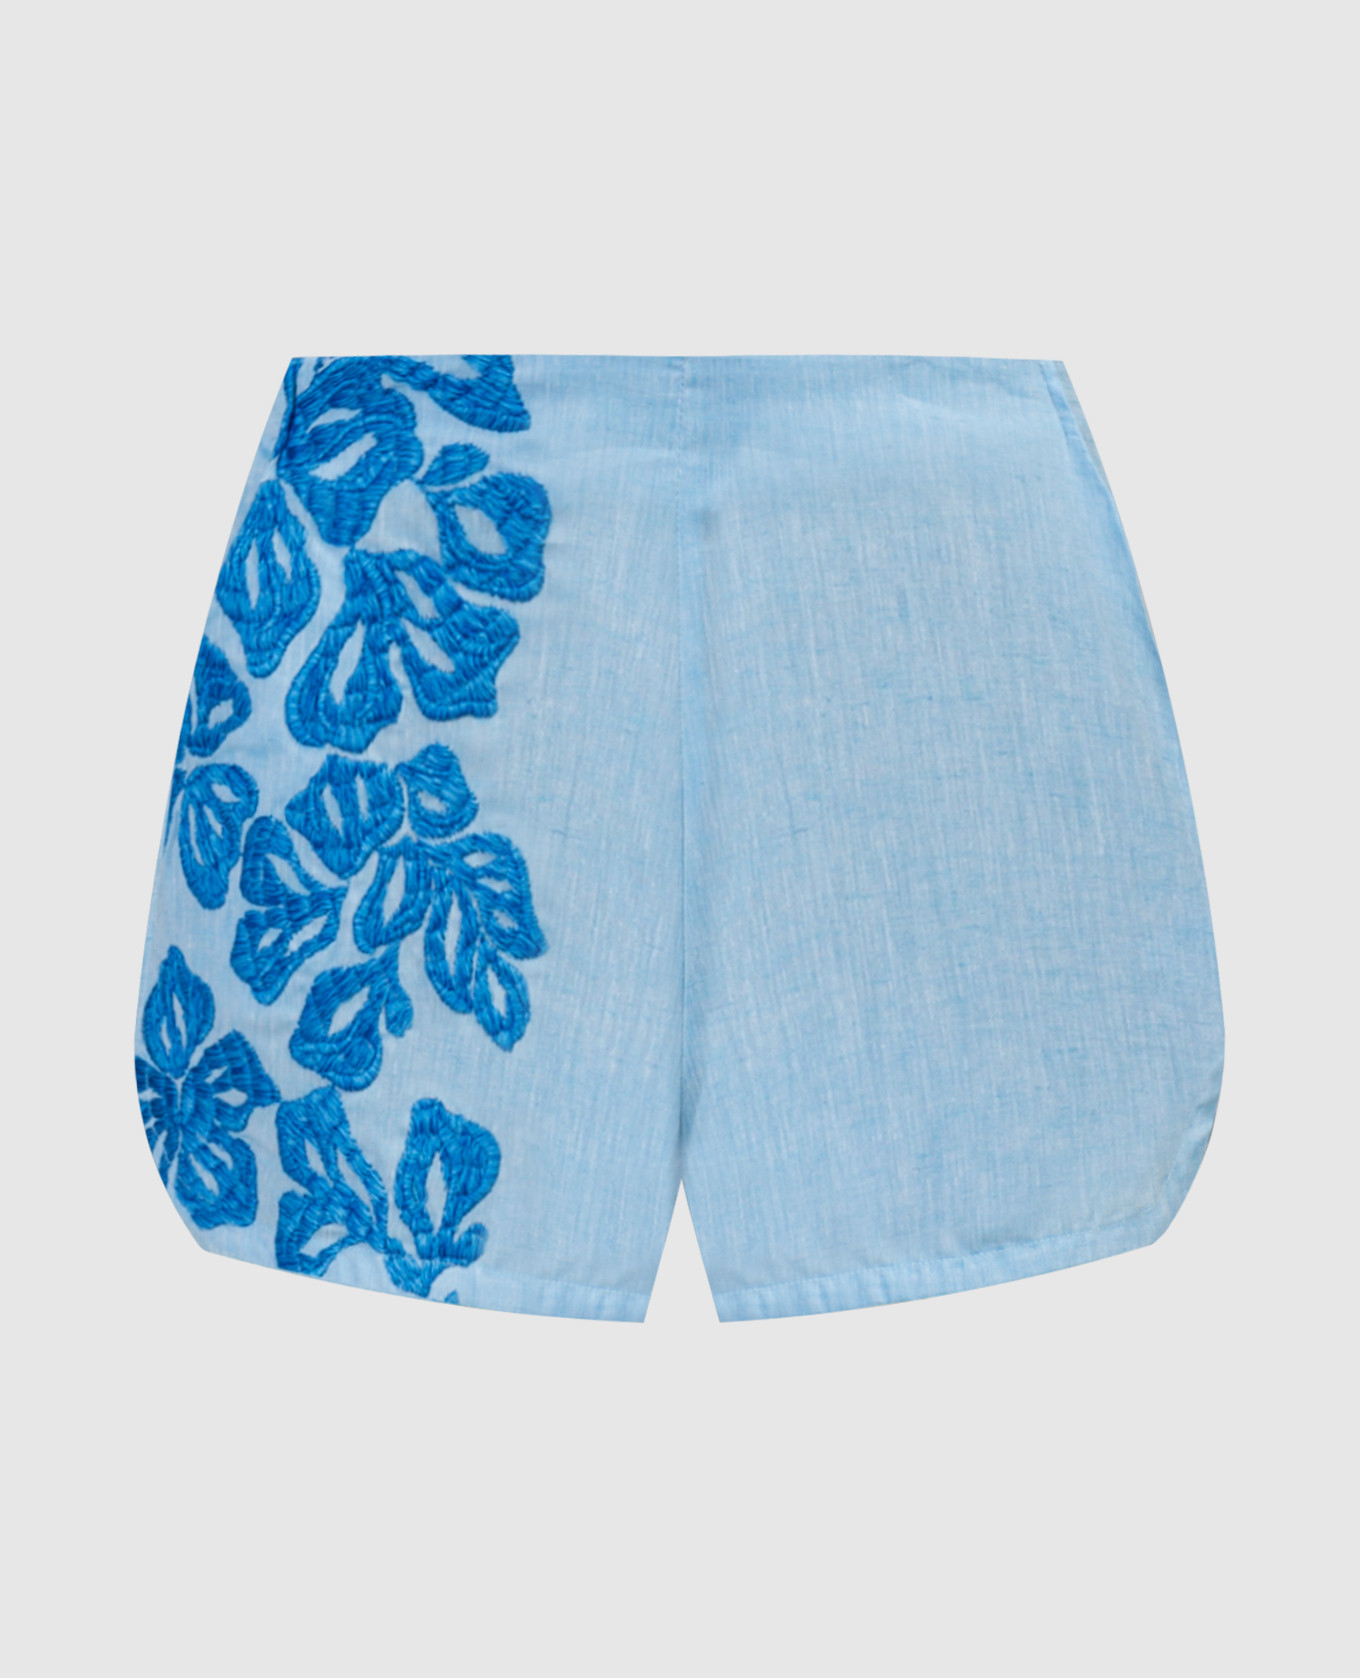 Blue linen shorts with embroidery